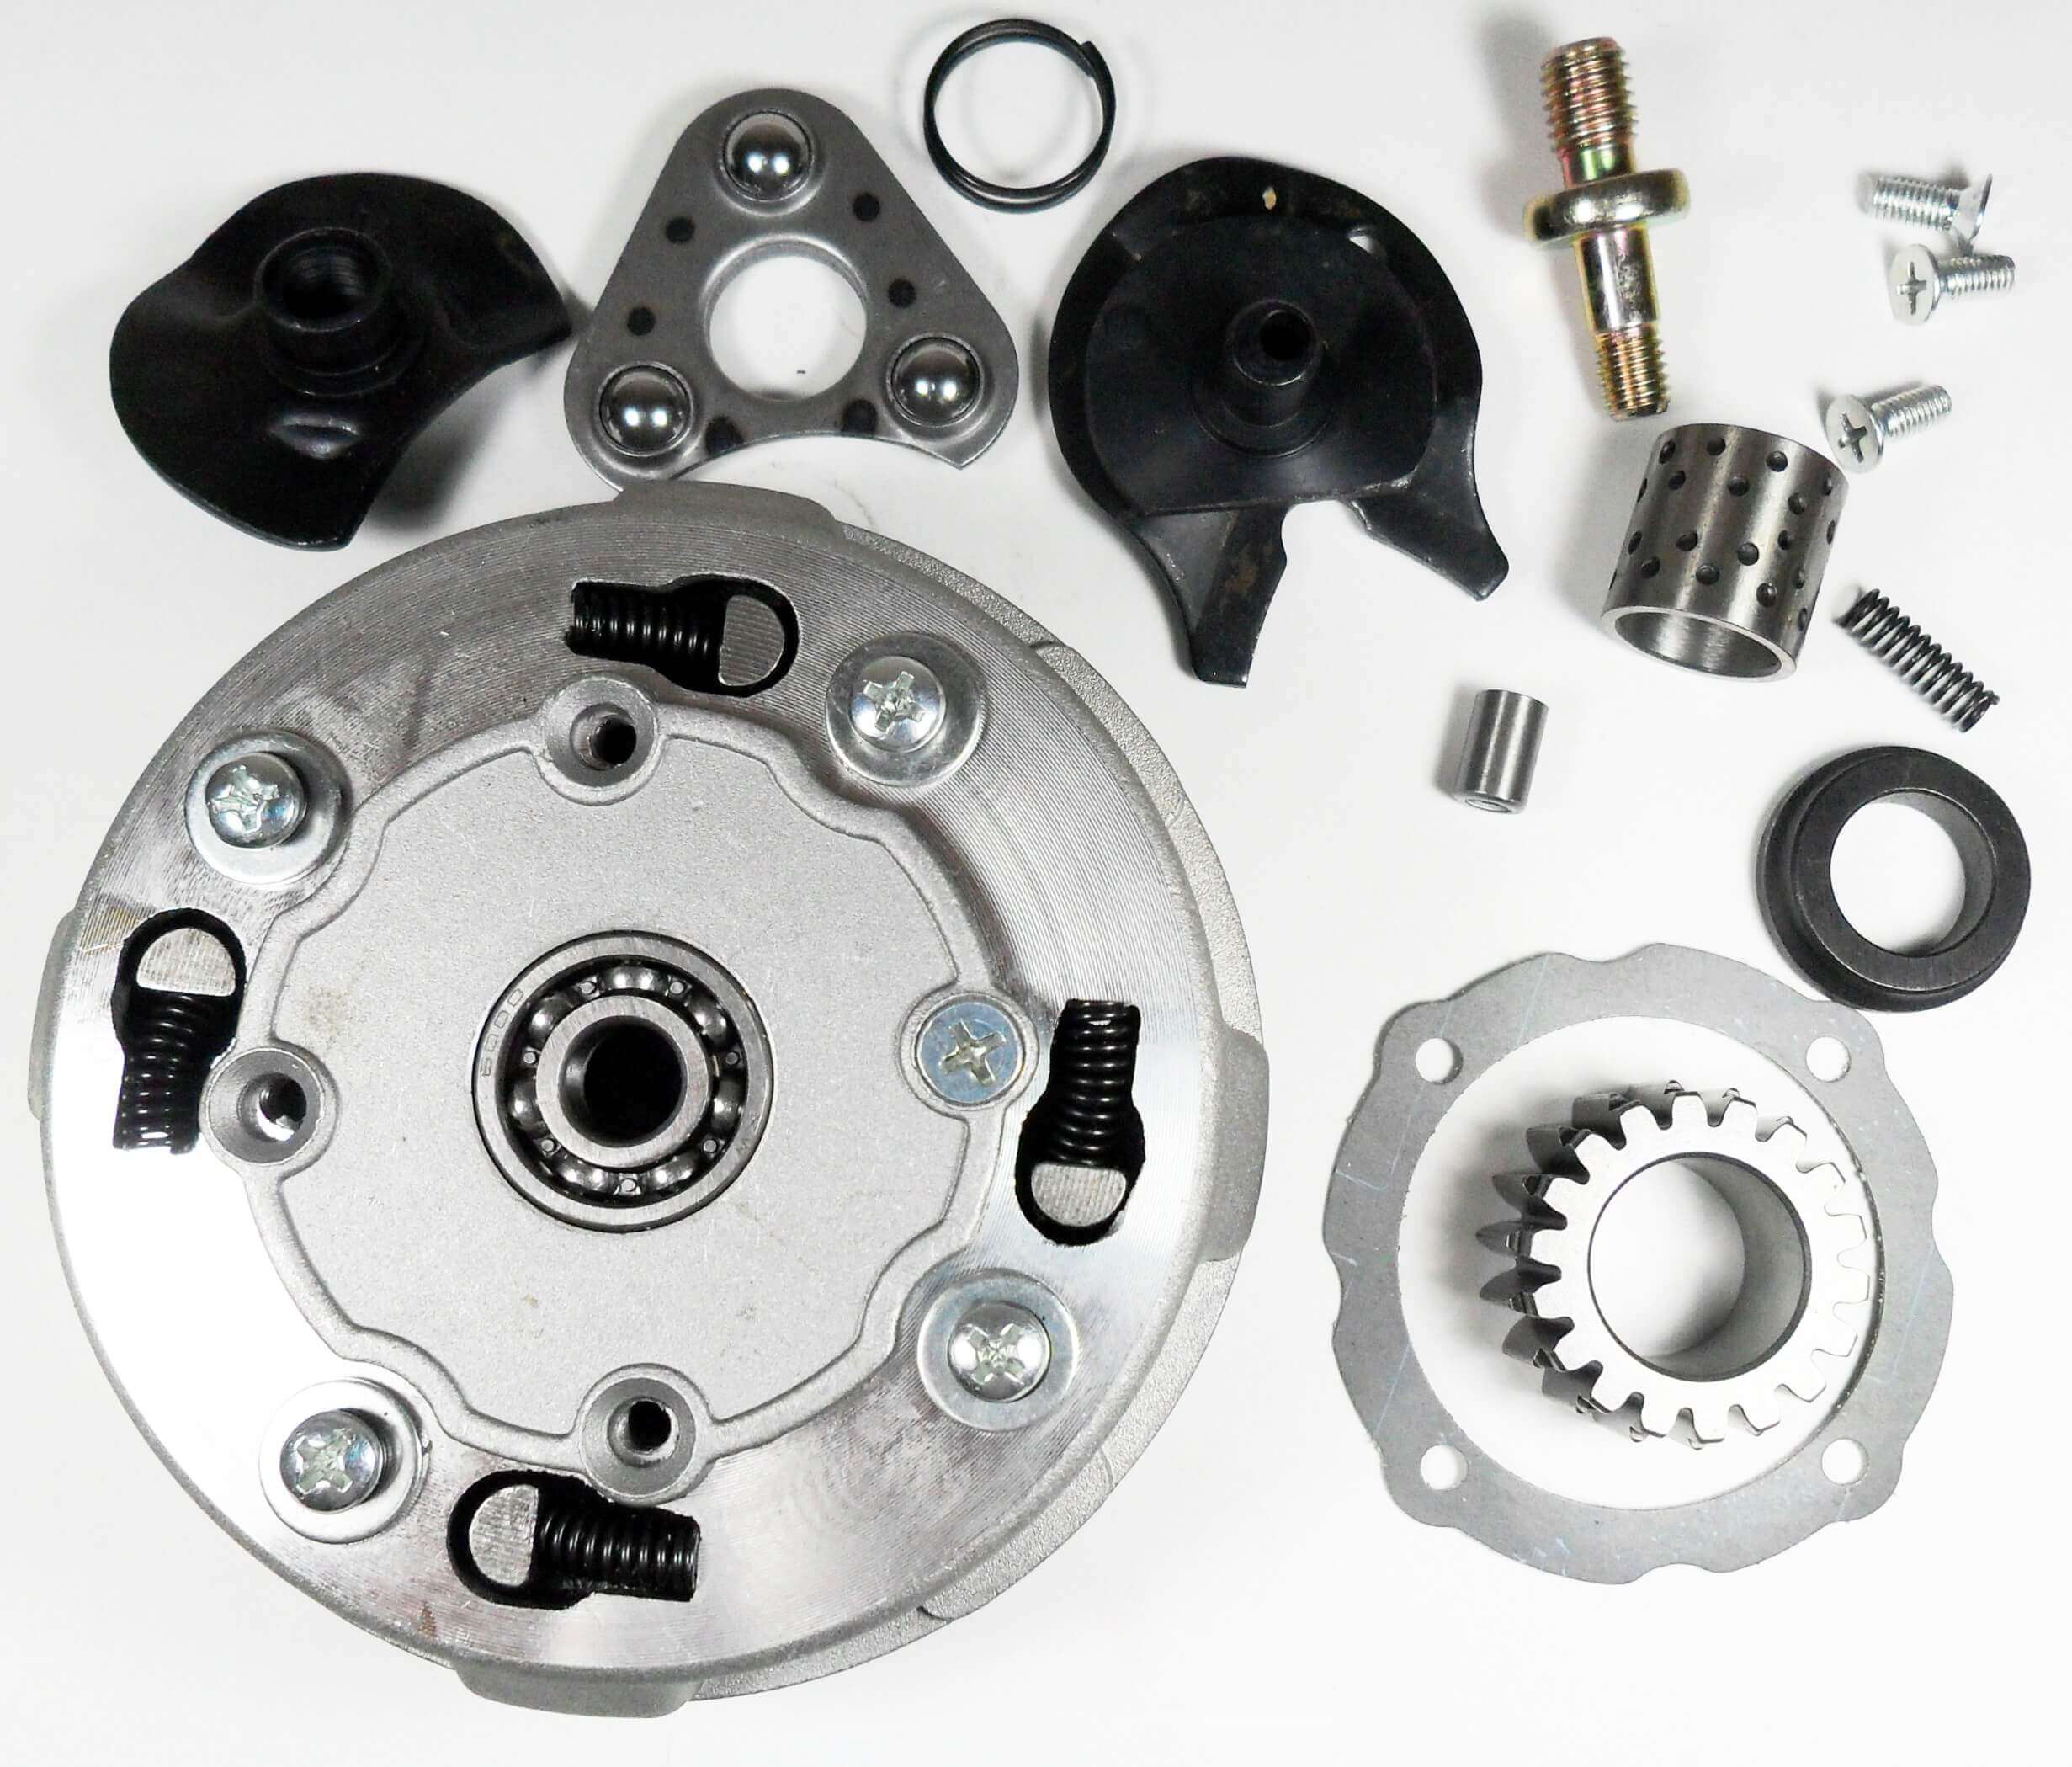 Rear Clutch 50-125cc Honda Copy Semi Auto ATVs, Dirtbikes Clutch OD=116 Bell Shaft=17mm For 18th Gear - Click Image to Close